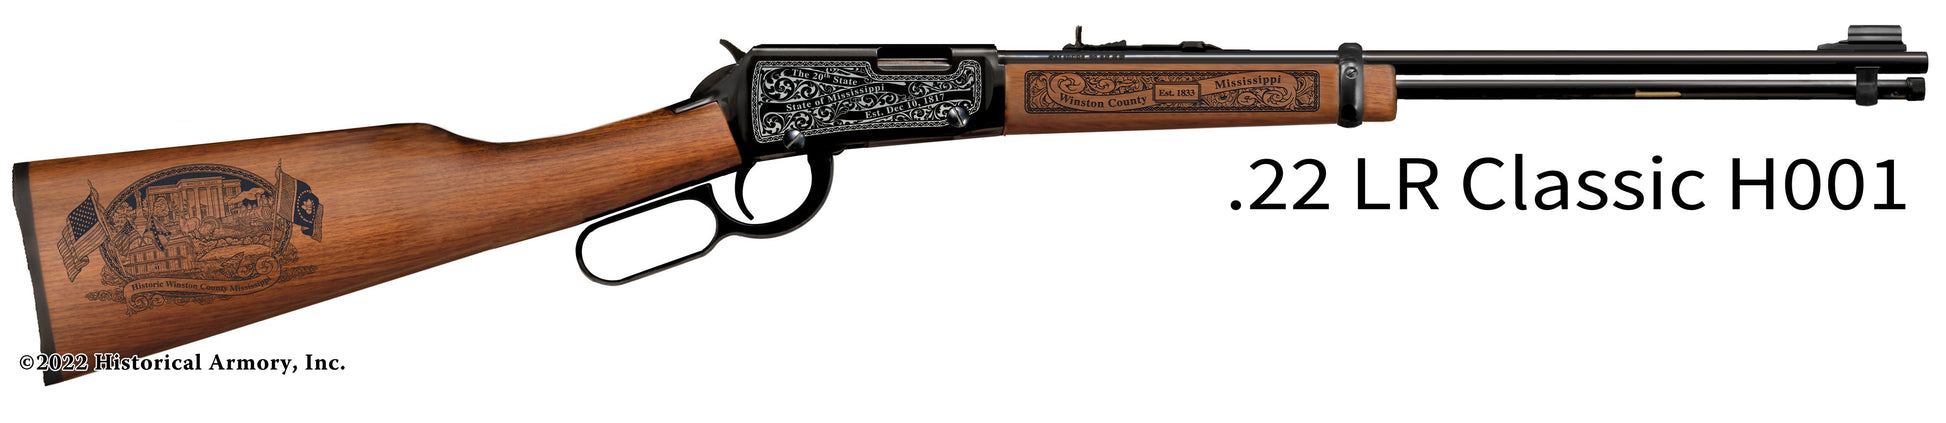 Winston County Mississippi Engraved Henry H001 Rifle